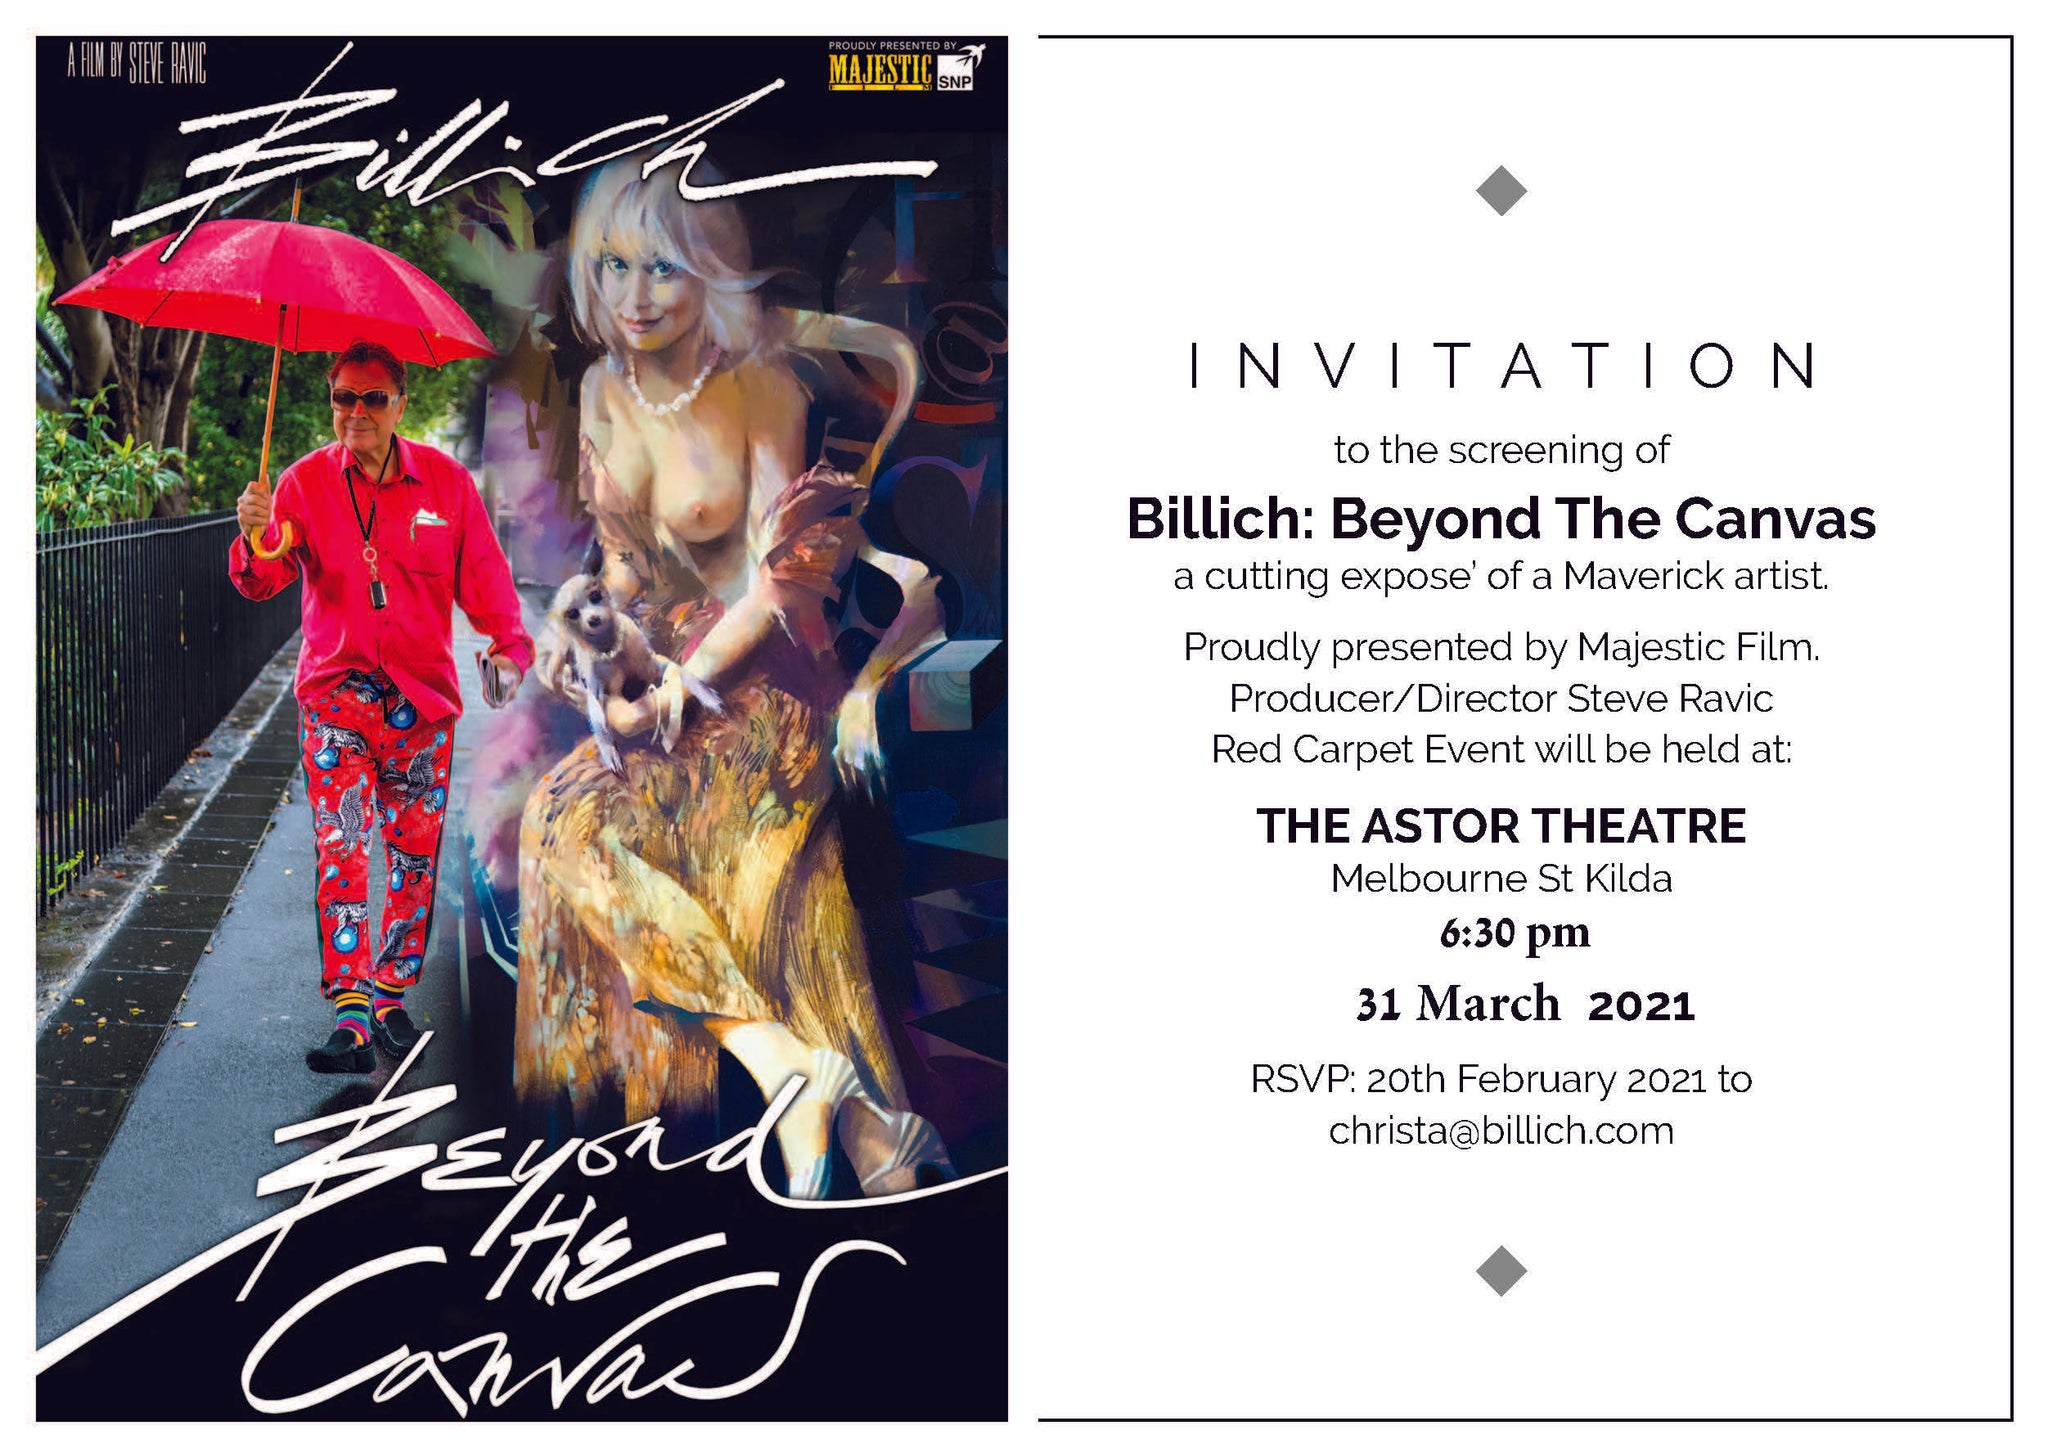 Date Changed to 31st March for Billich Film Screening in Melbourne